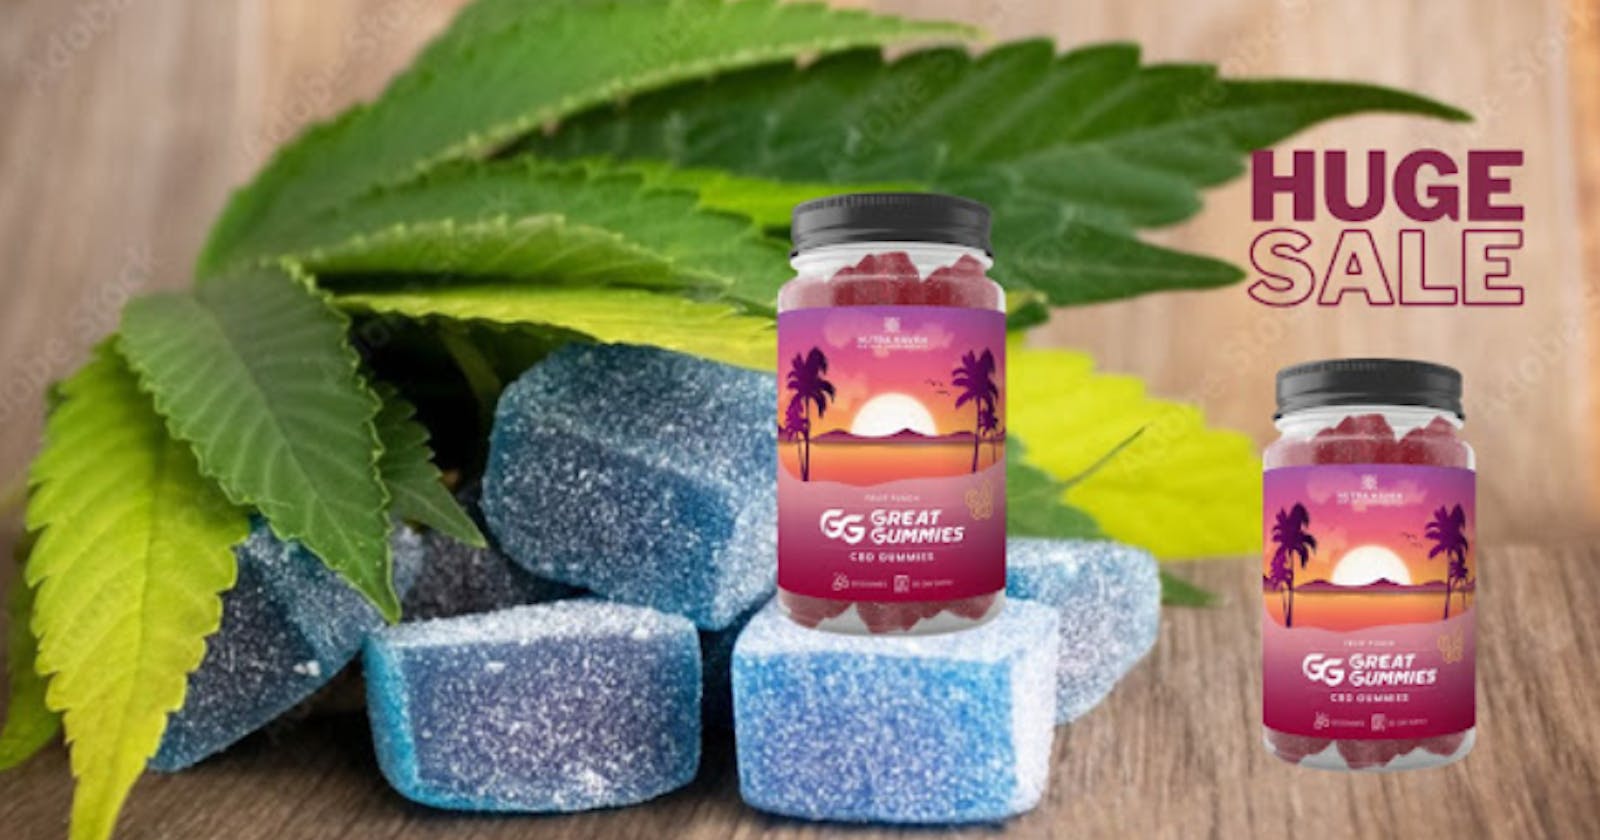 Great CBD Gummies Reviews, Side Effects, Near Me, Amazon, Cost, Price, Reddit, Scam & Where To Buy?